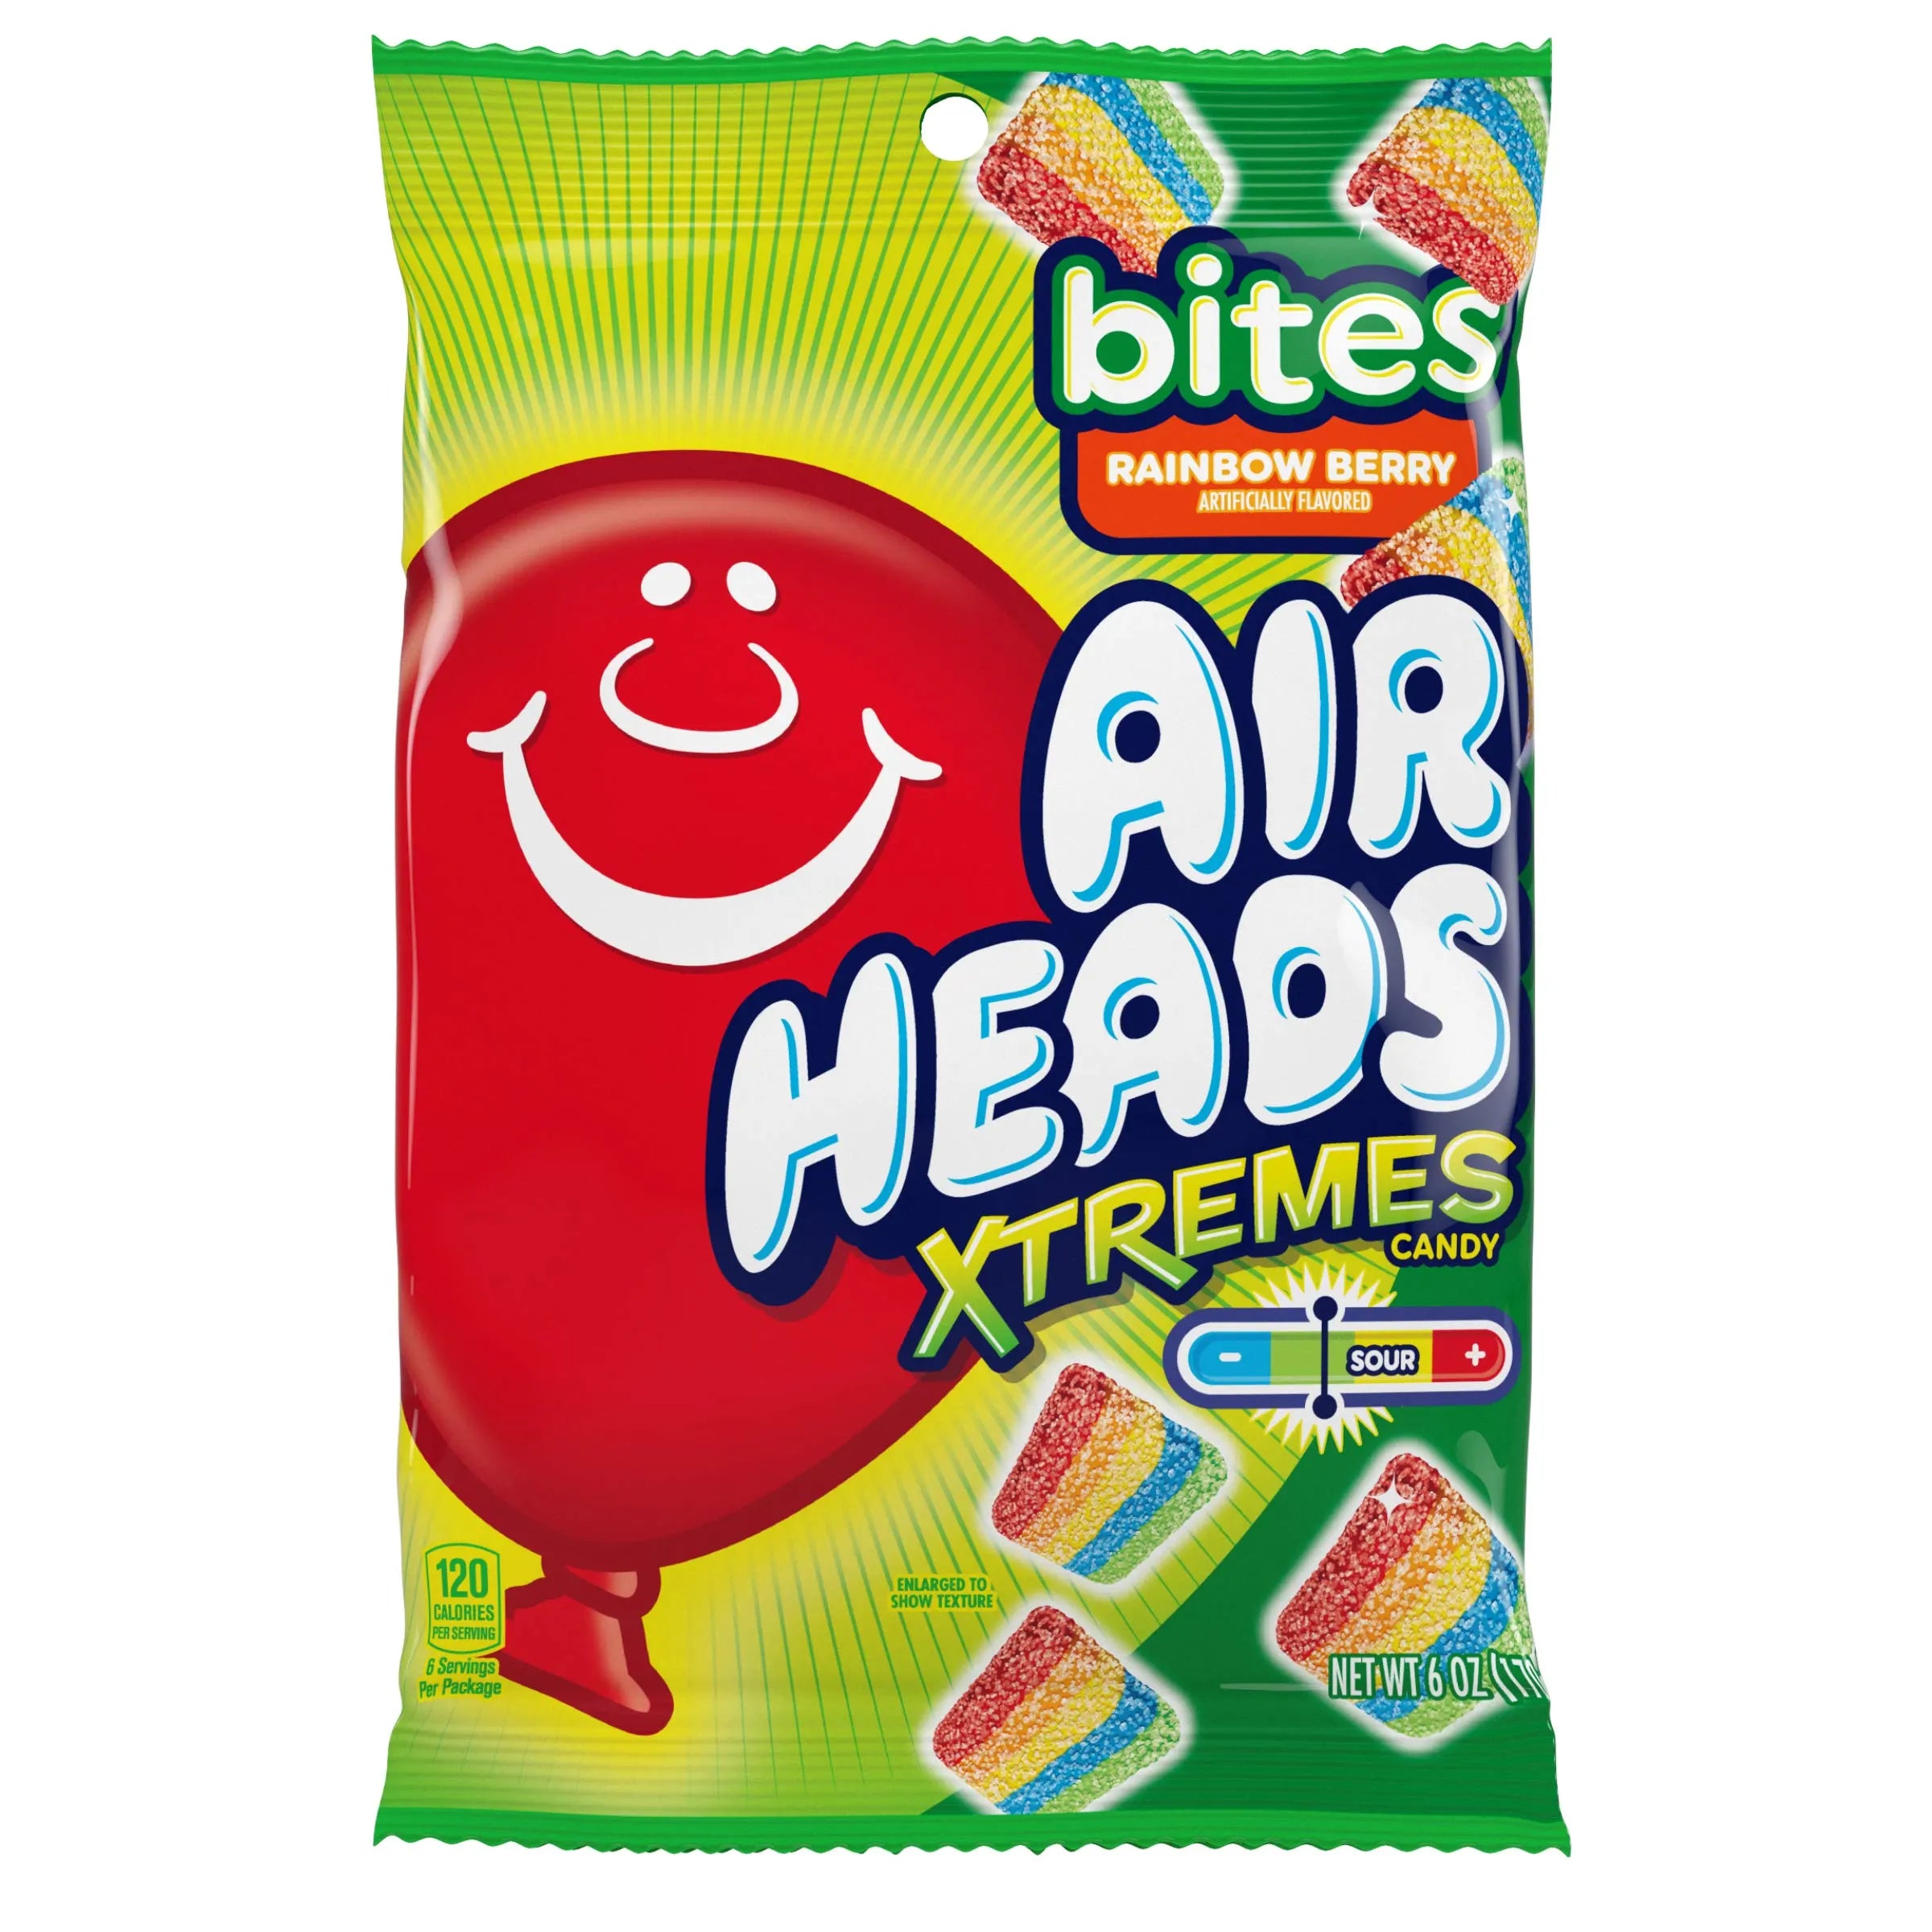 Airheads Xtremes Sourful Rainbow Berry Bites (170g)